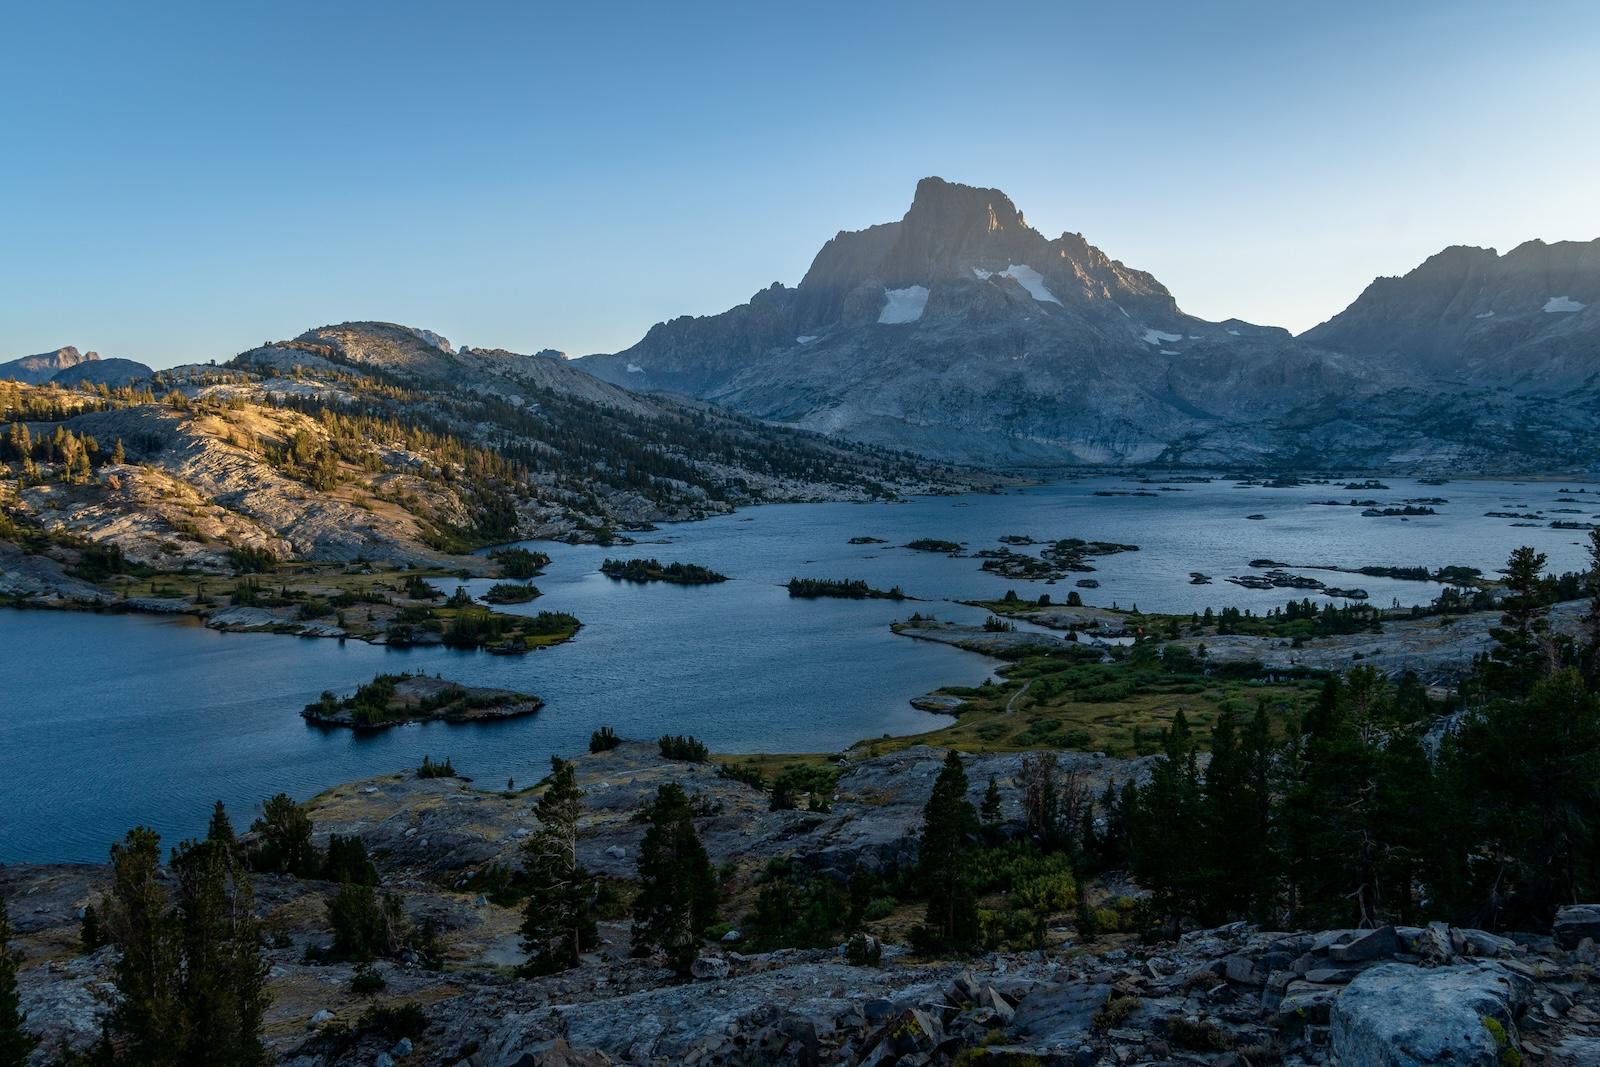 Dusk at Thousand Island Lake in the Sierras